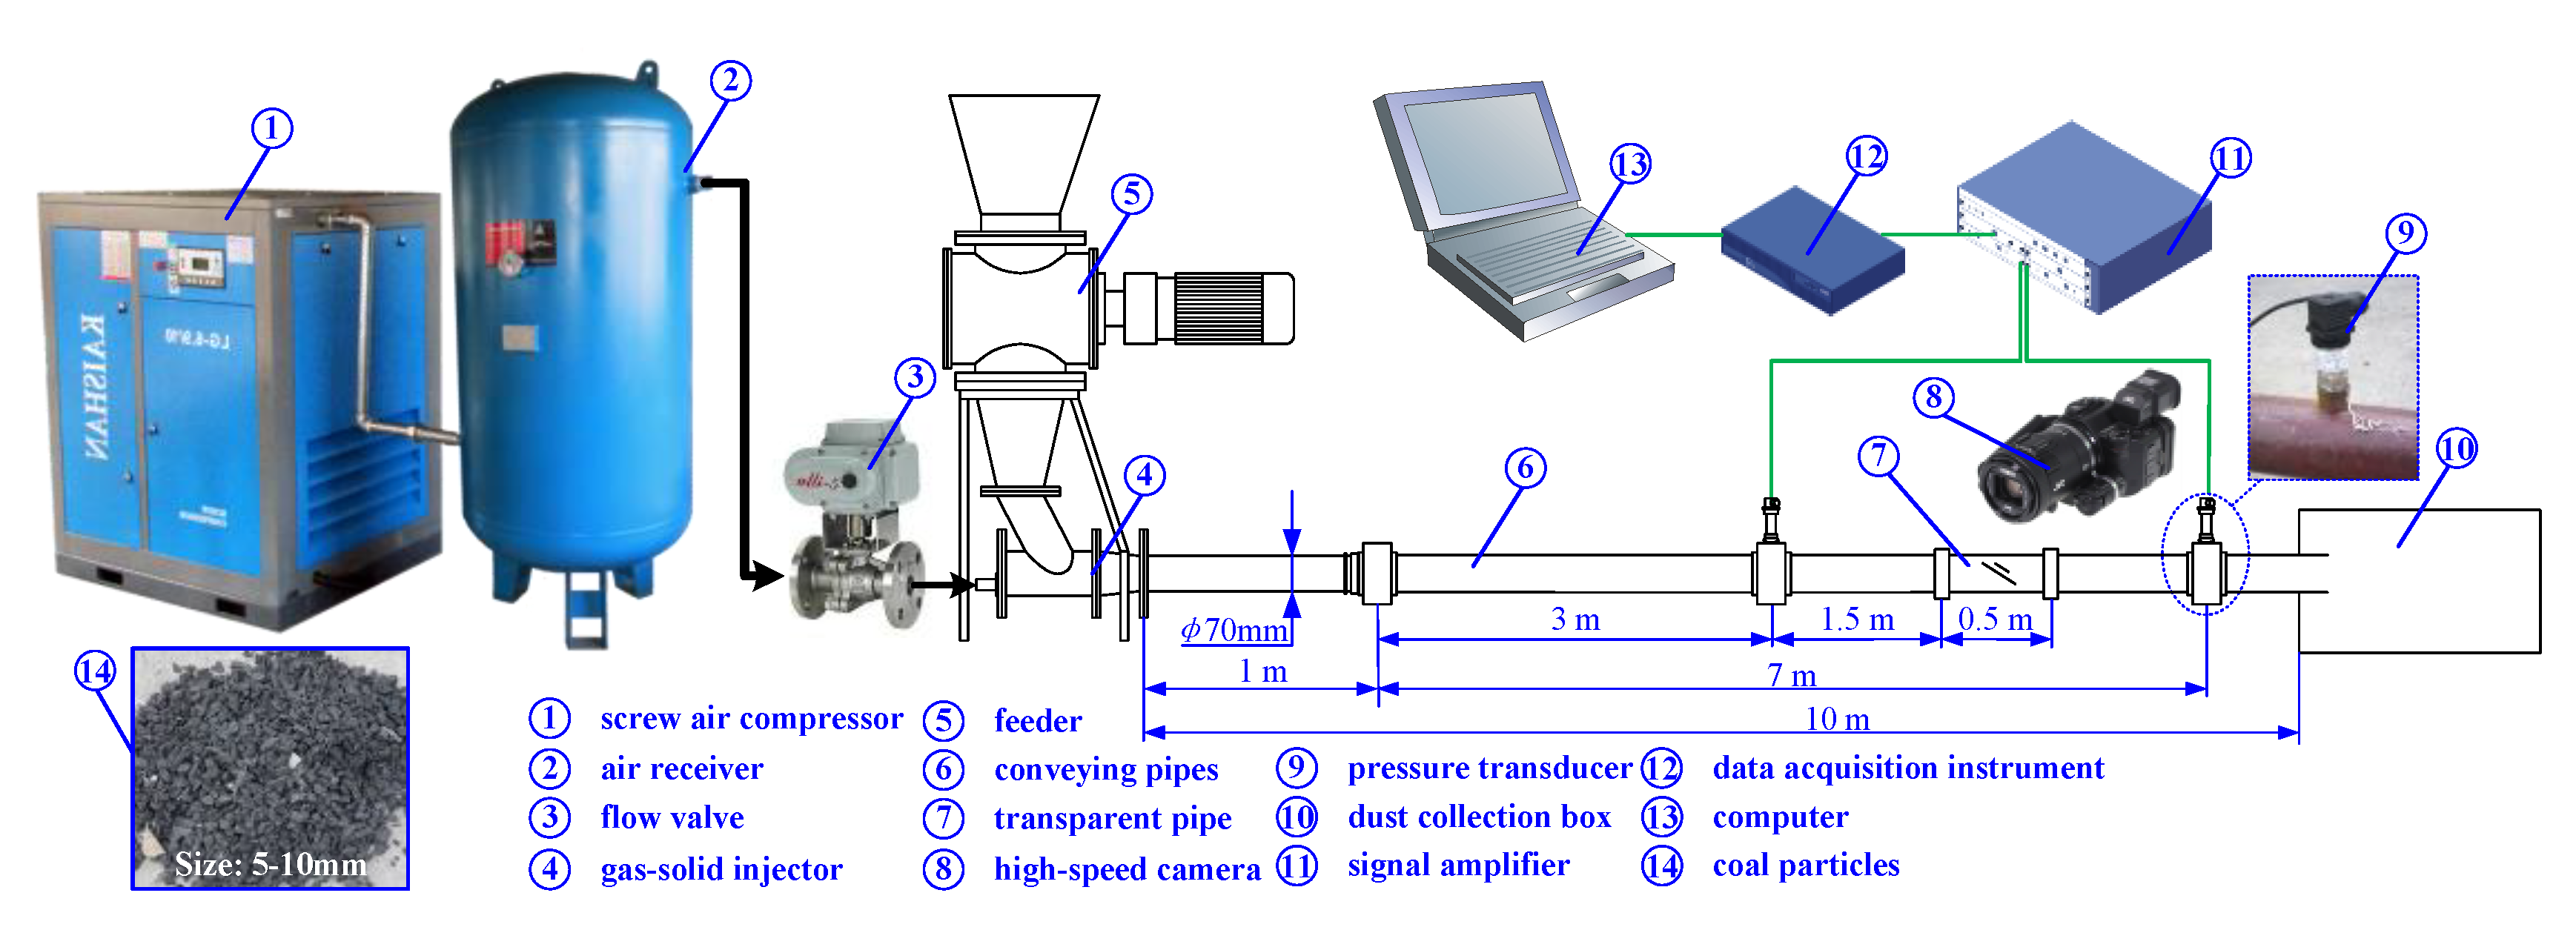 pneumatic conveying of pulverized coal